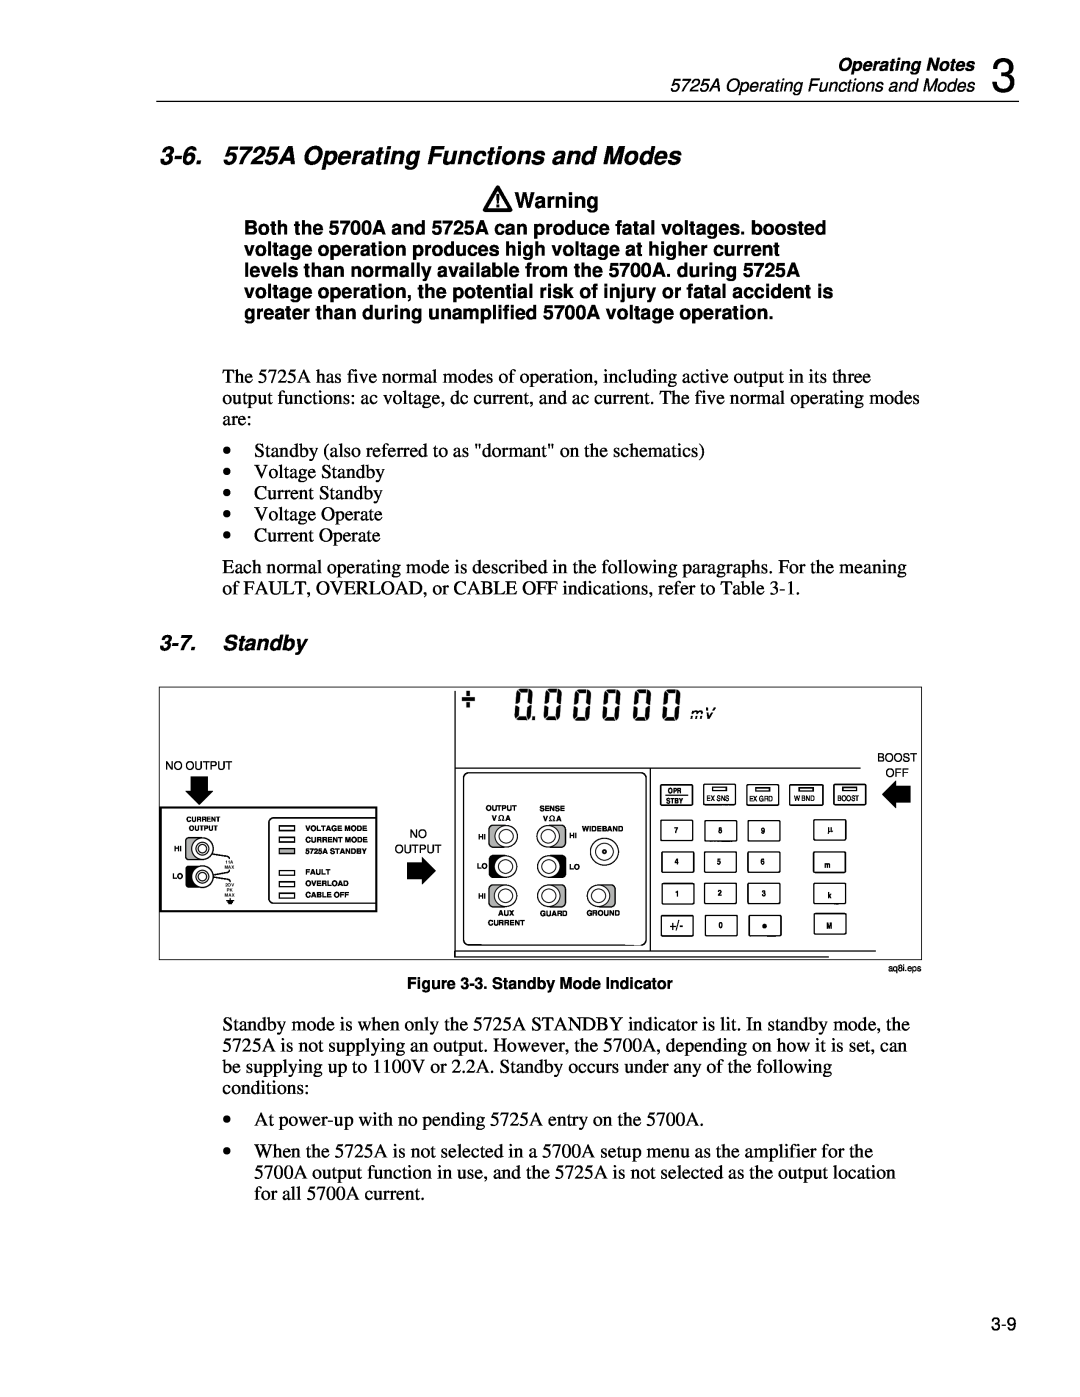 Fluke instruction manual 3-6.5725A Operating Functions and Modes, Standby 